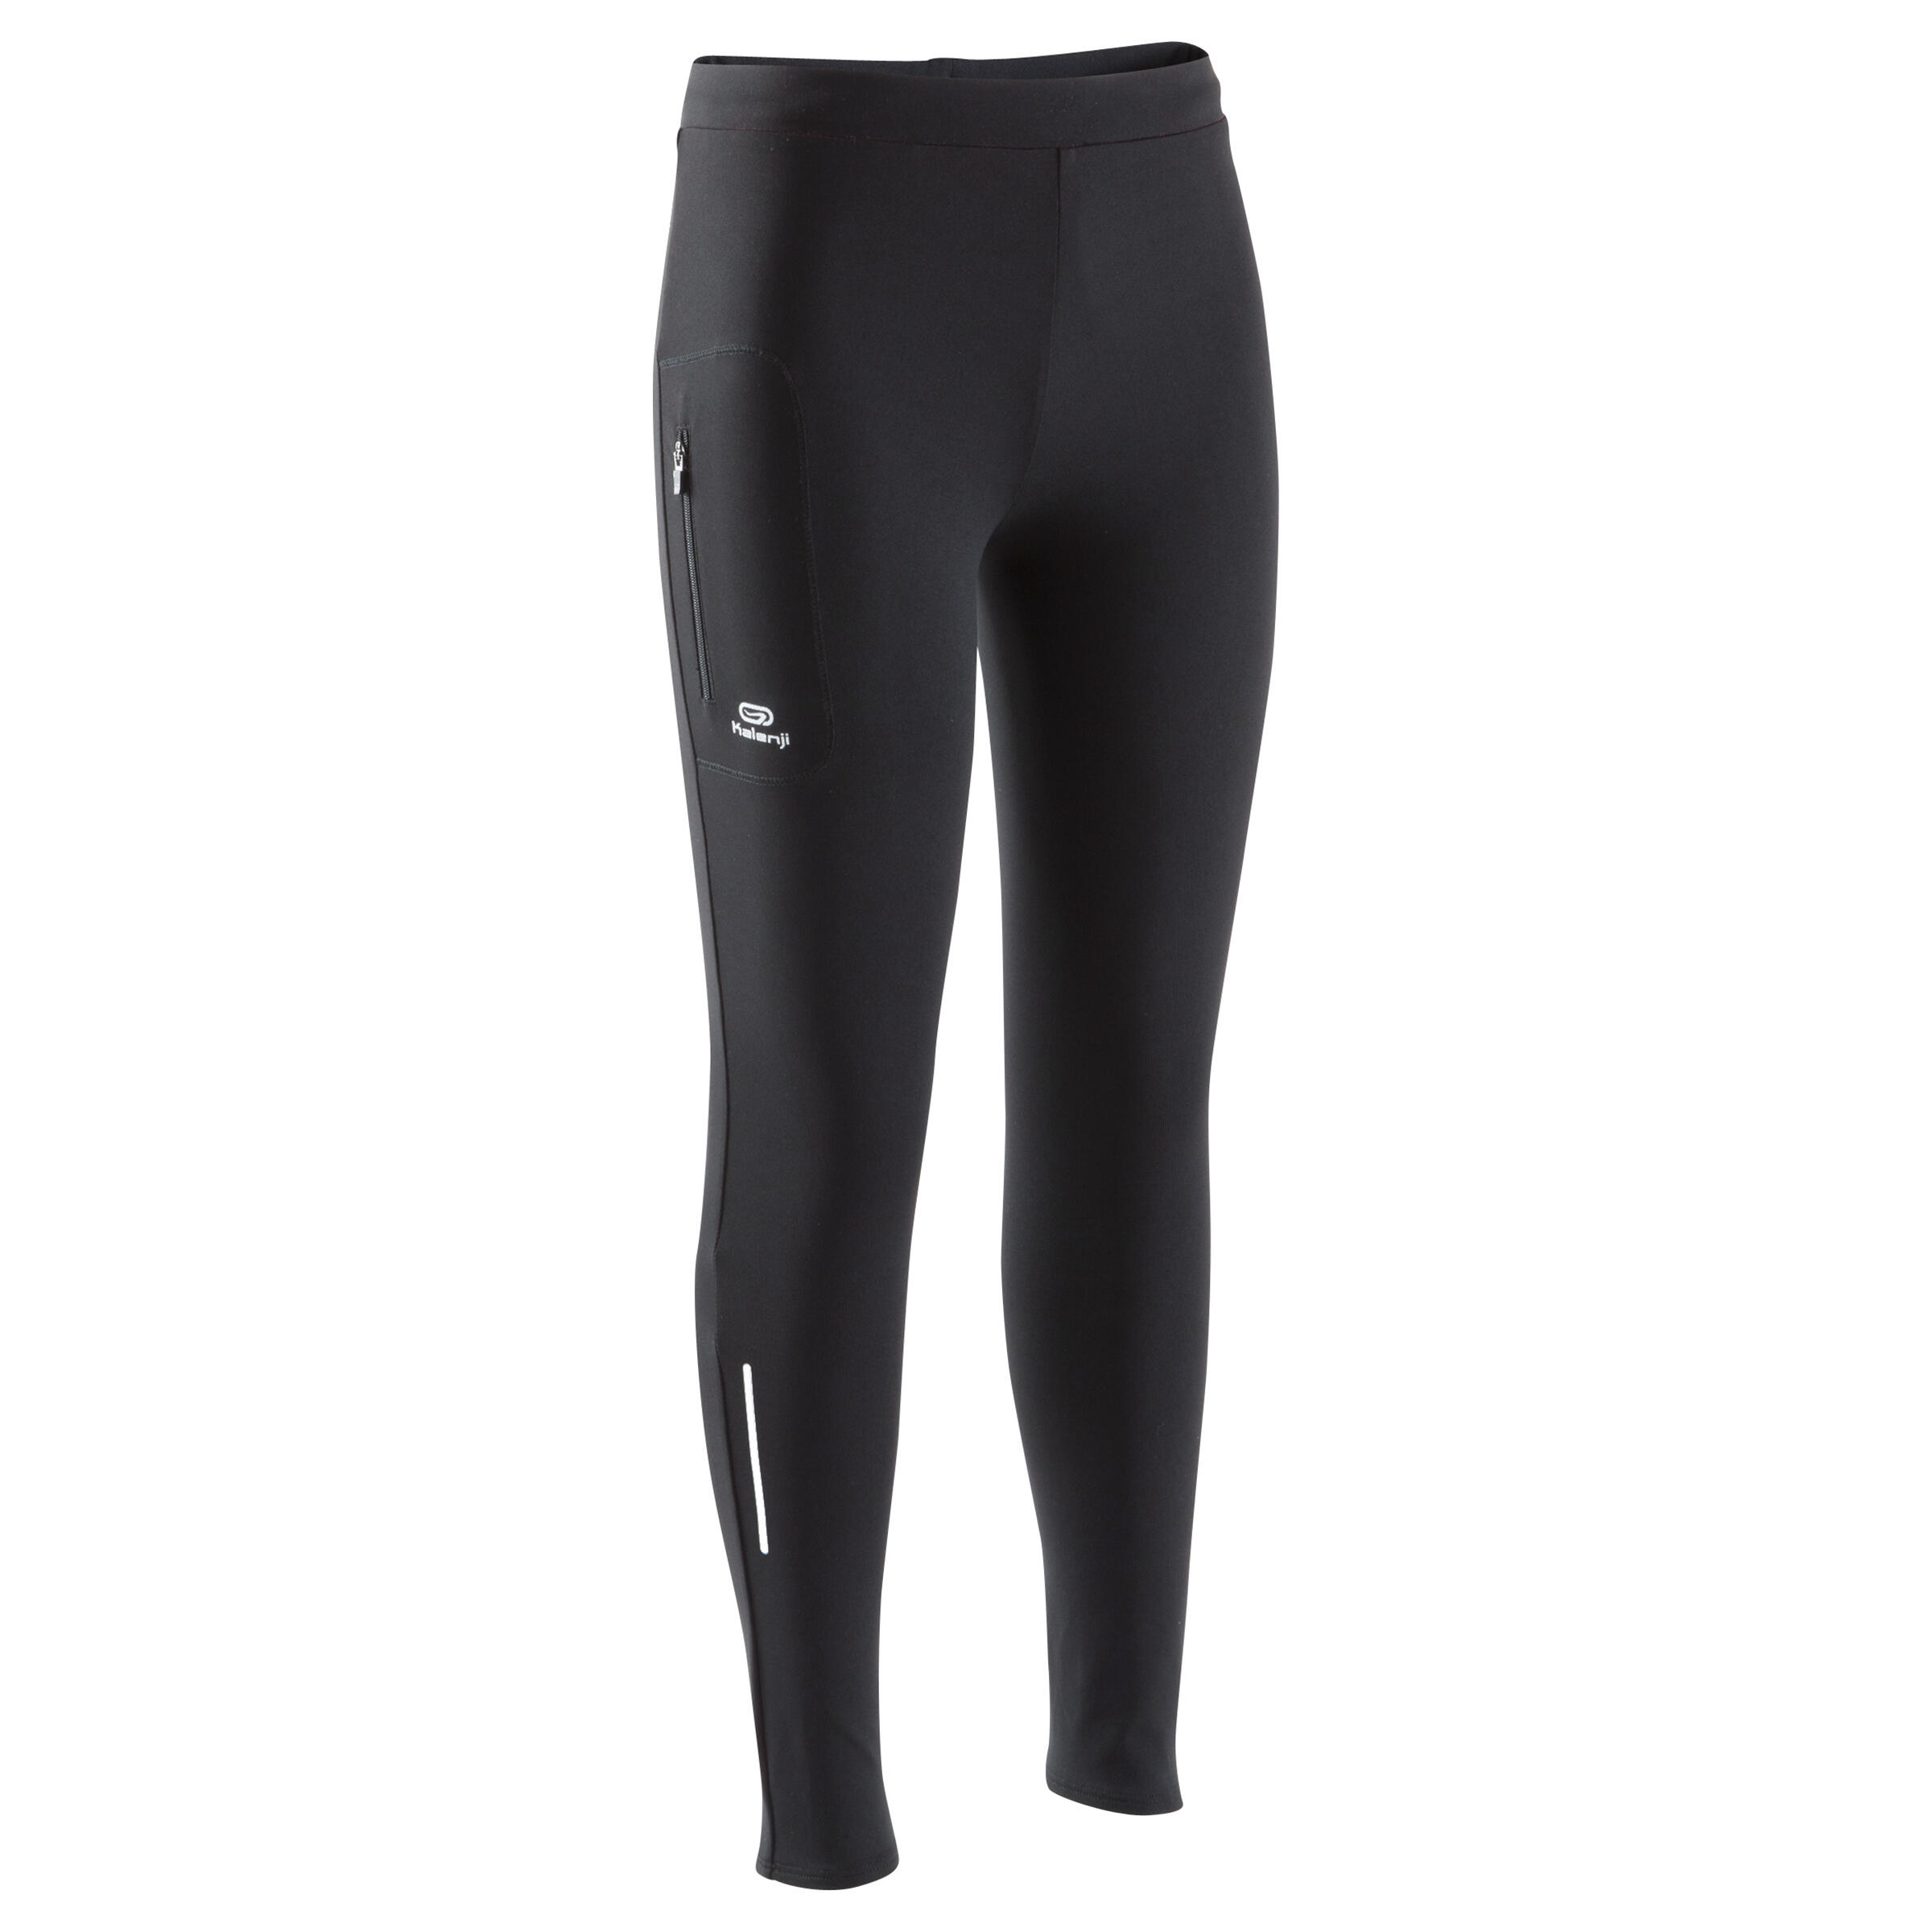 DOMYOS by Decathlon Solid Women Black Tights - Buy DOMYOS by Decathlon  Solid Women Black Tights Online at Best Prices in India | Flipkart.com